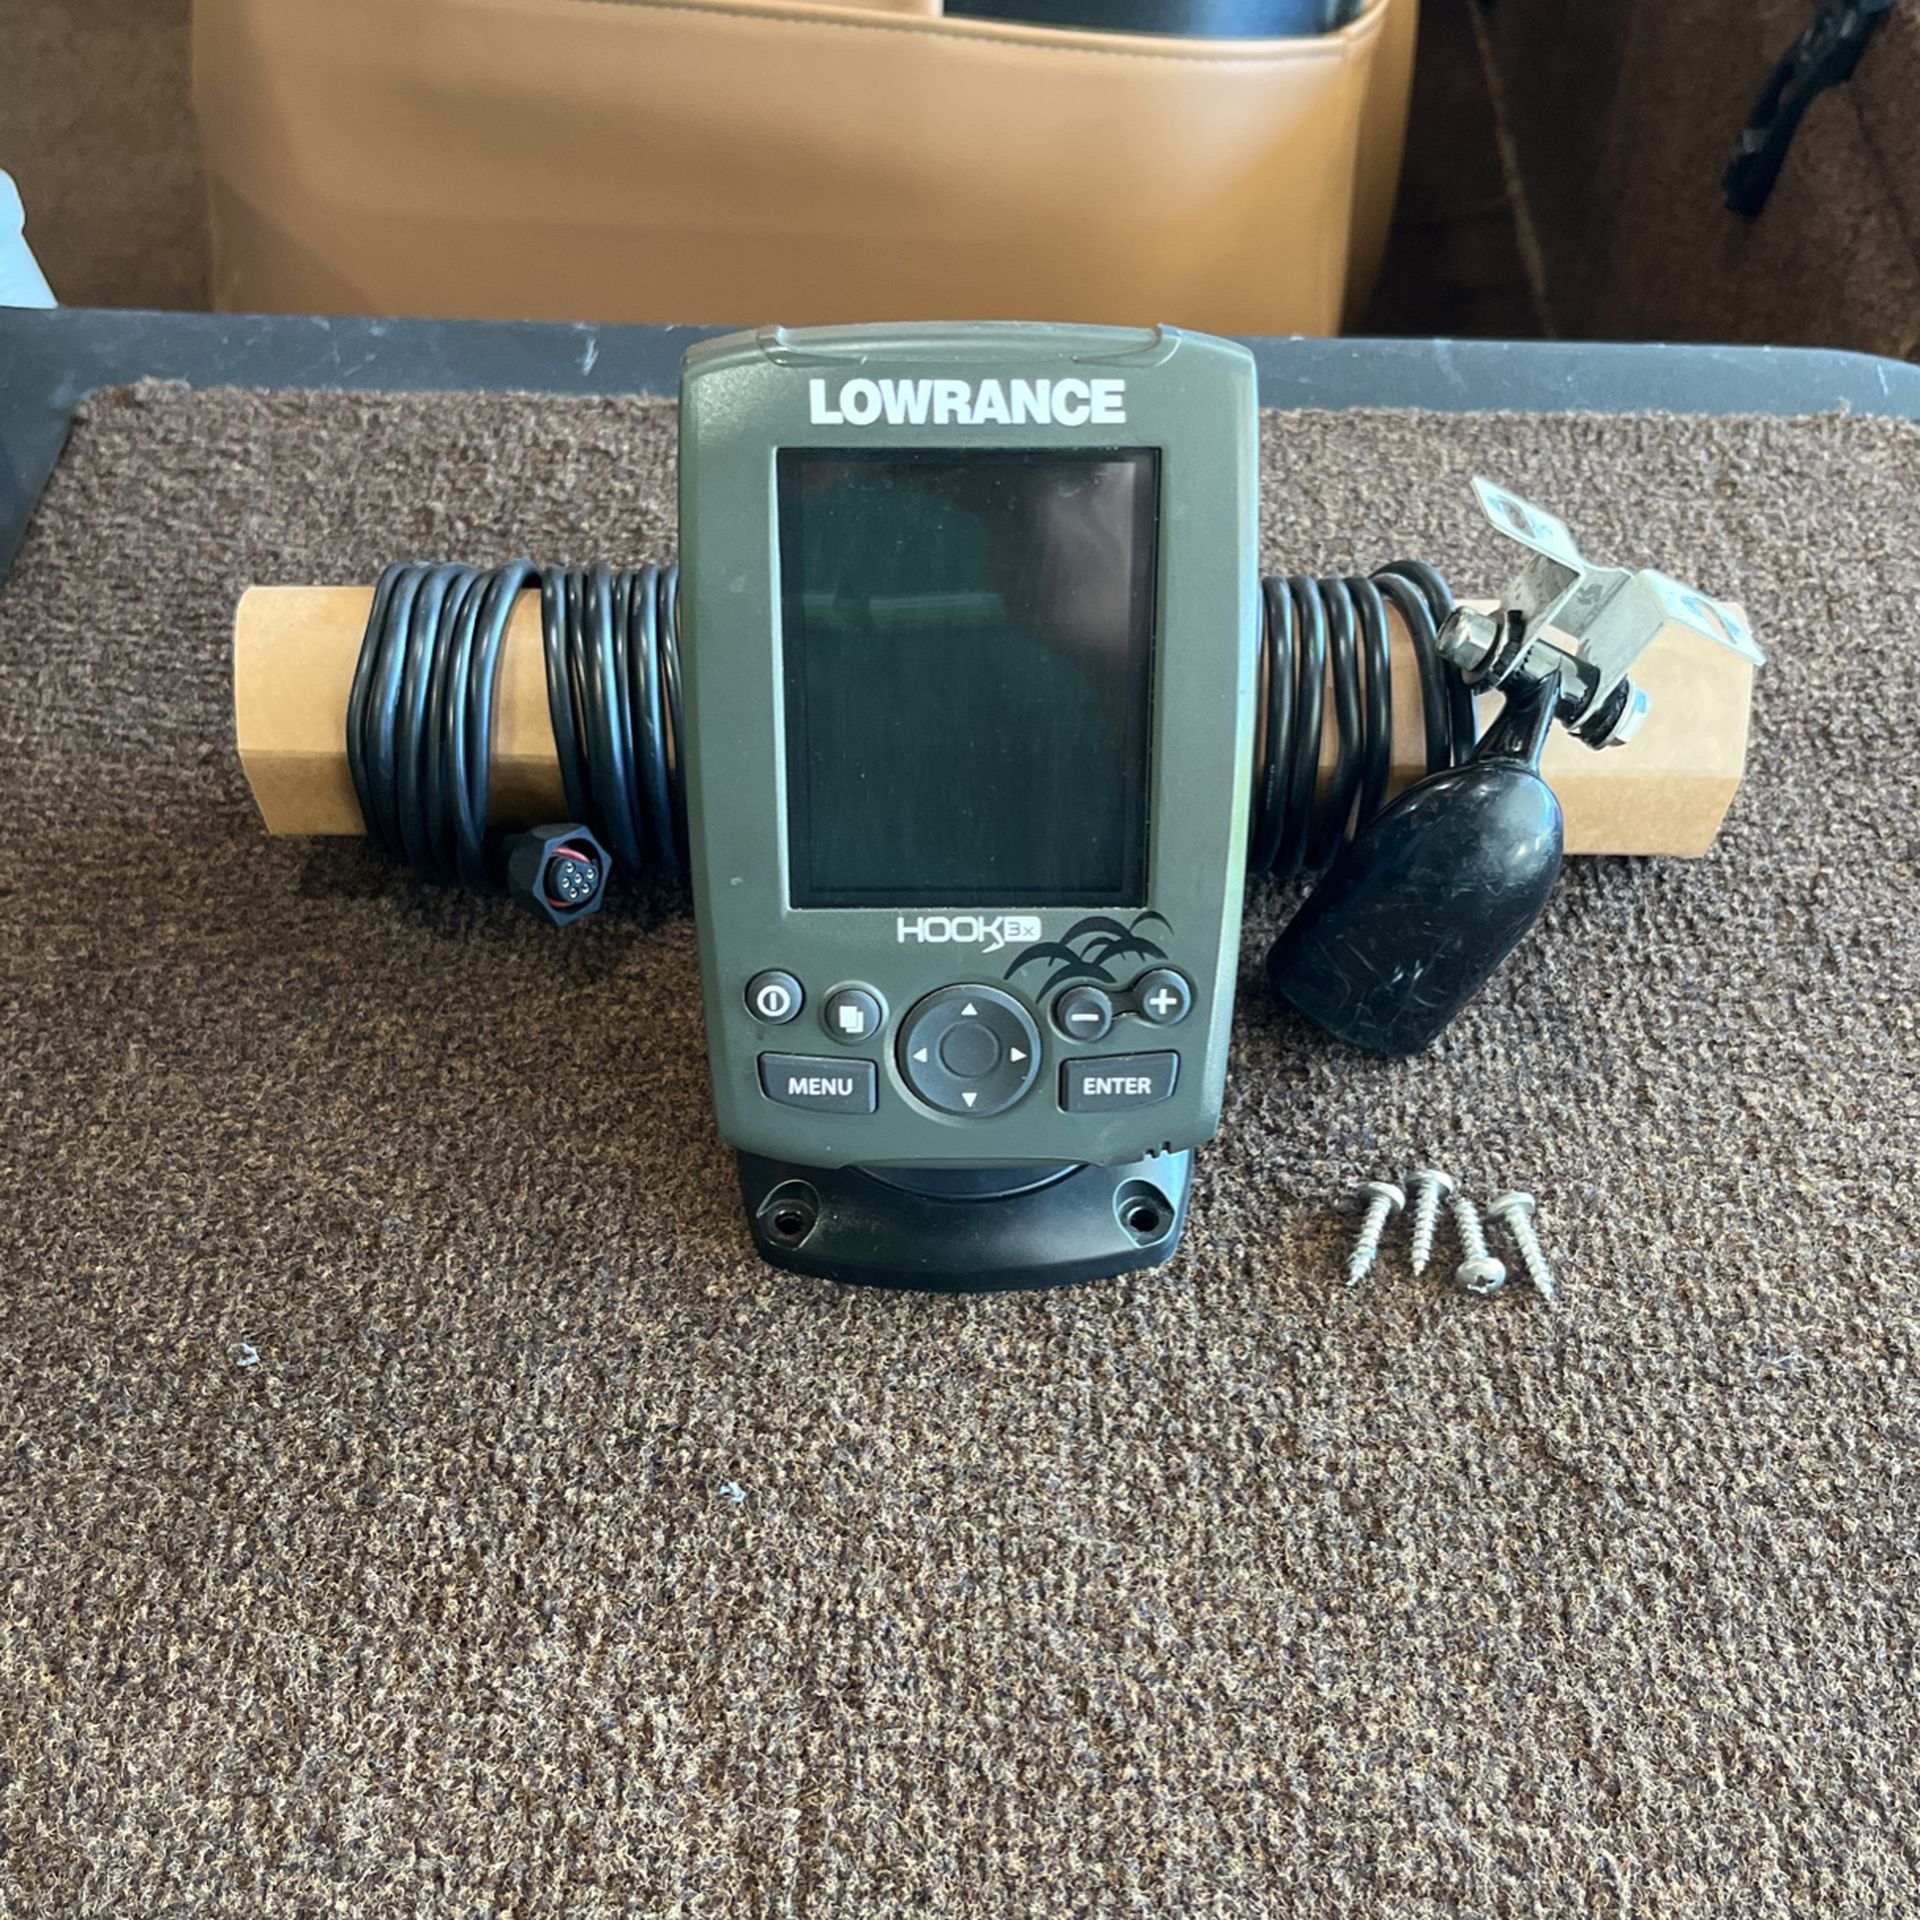 Lowrance Fish Finder for Sale in Temecula, CA - OfferUp